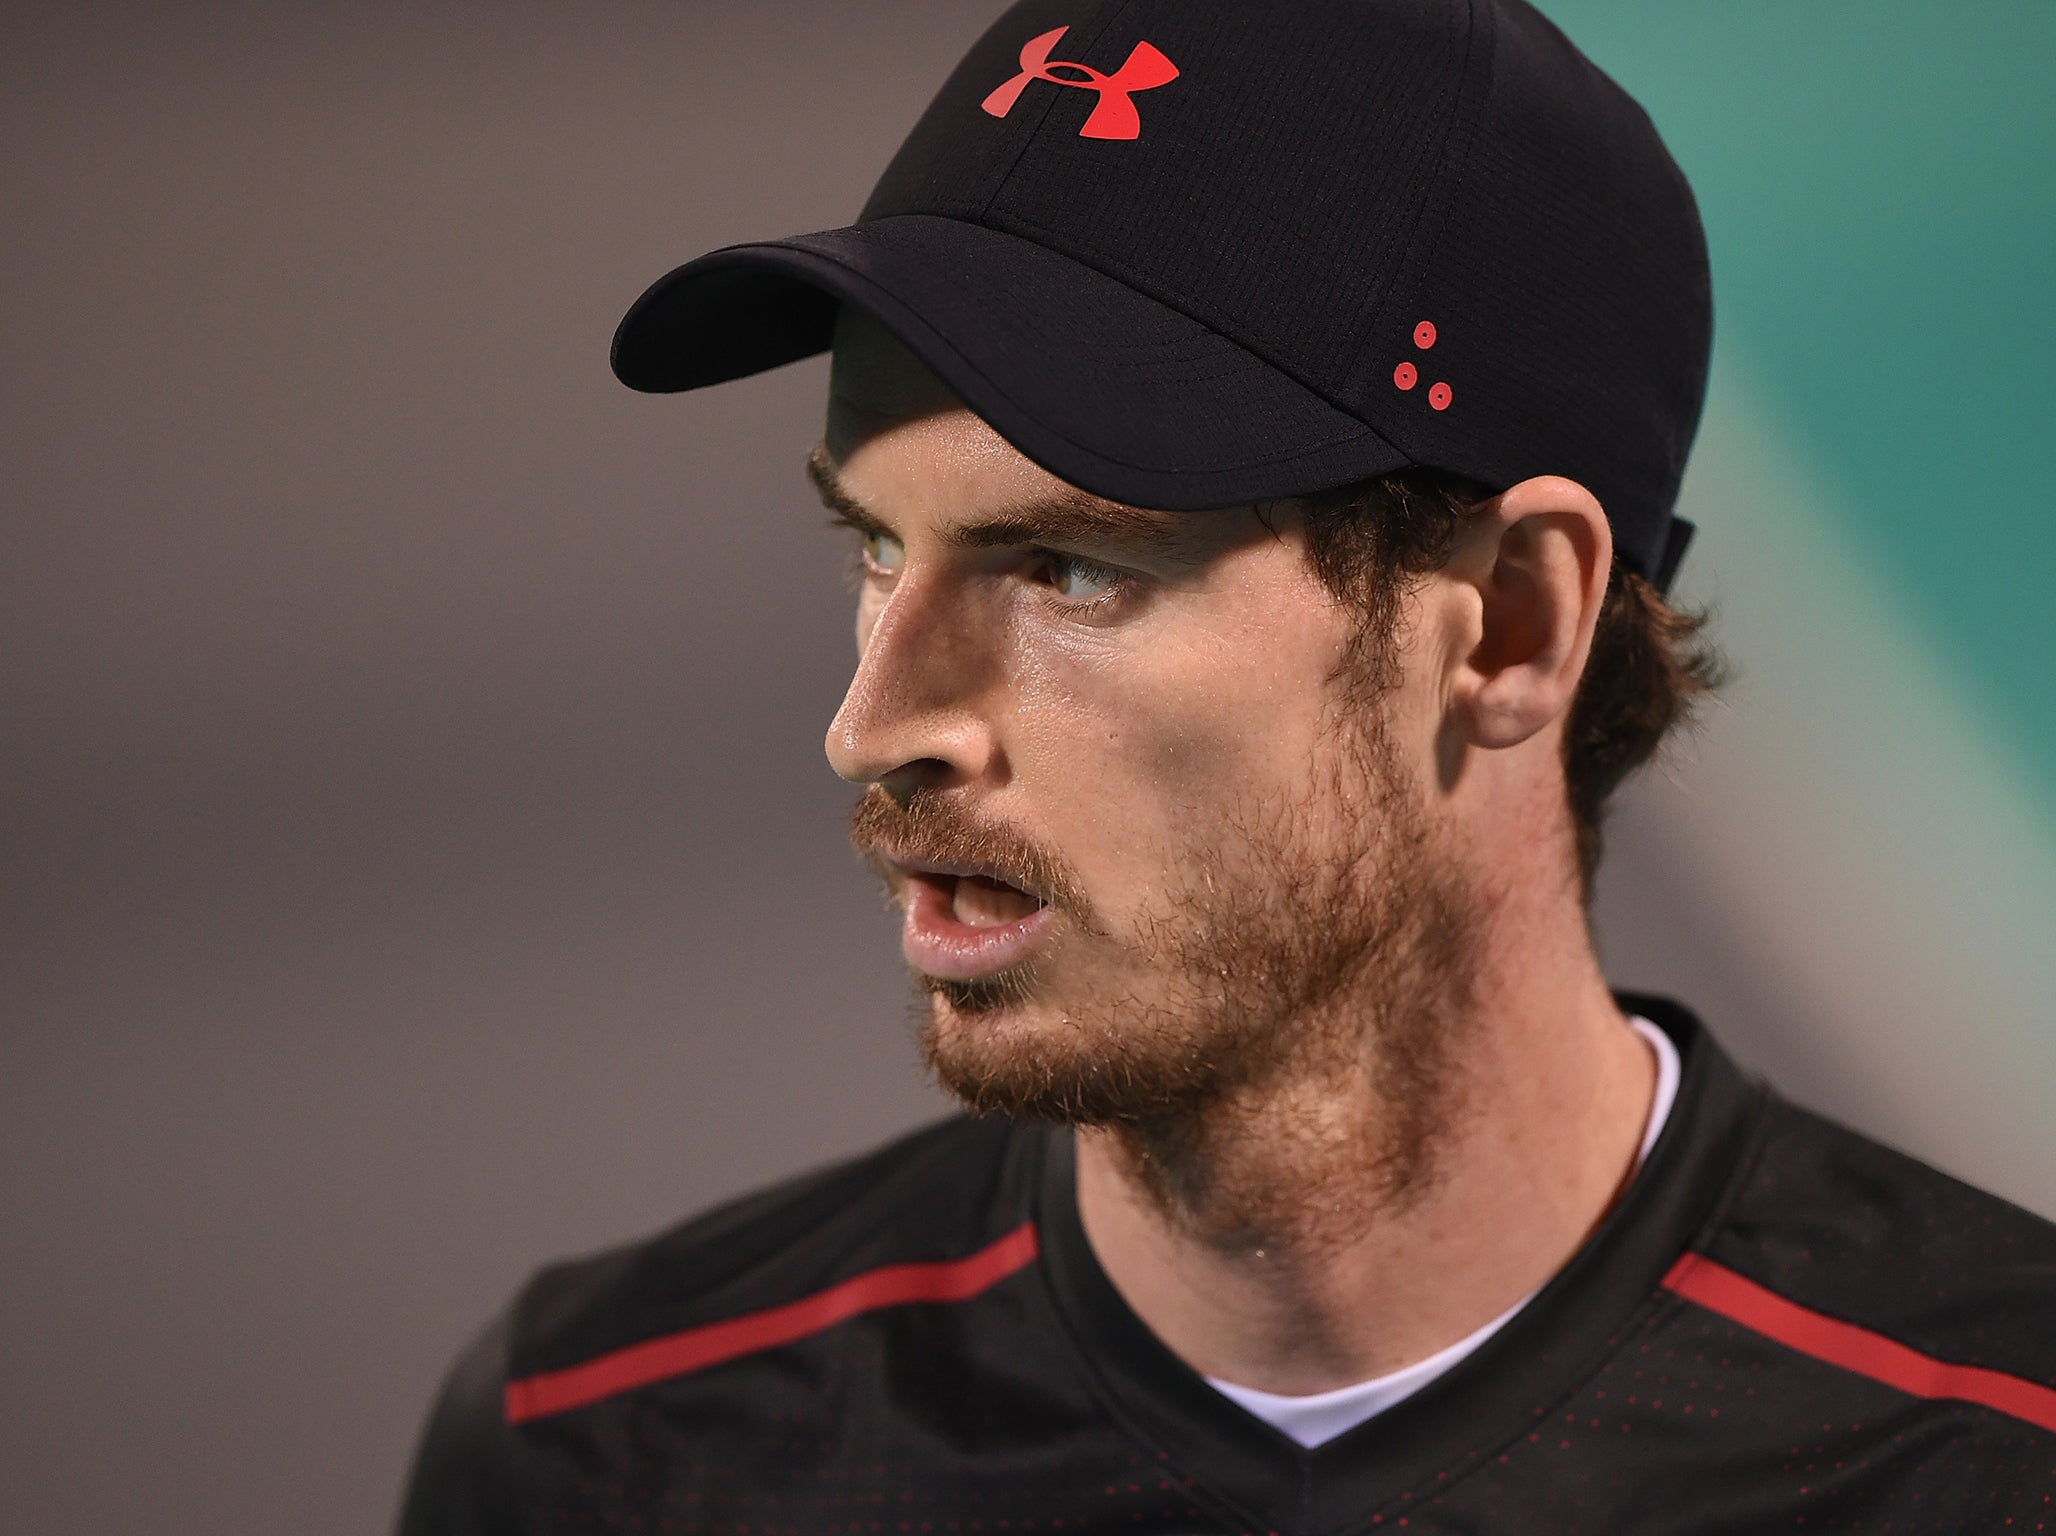 Murray is unsure if he'll be able to compete at the Australian Open